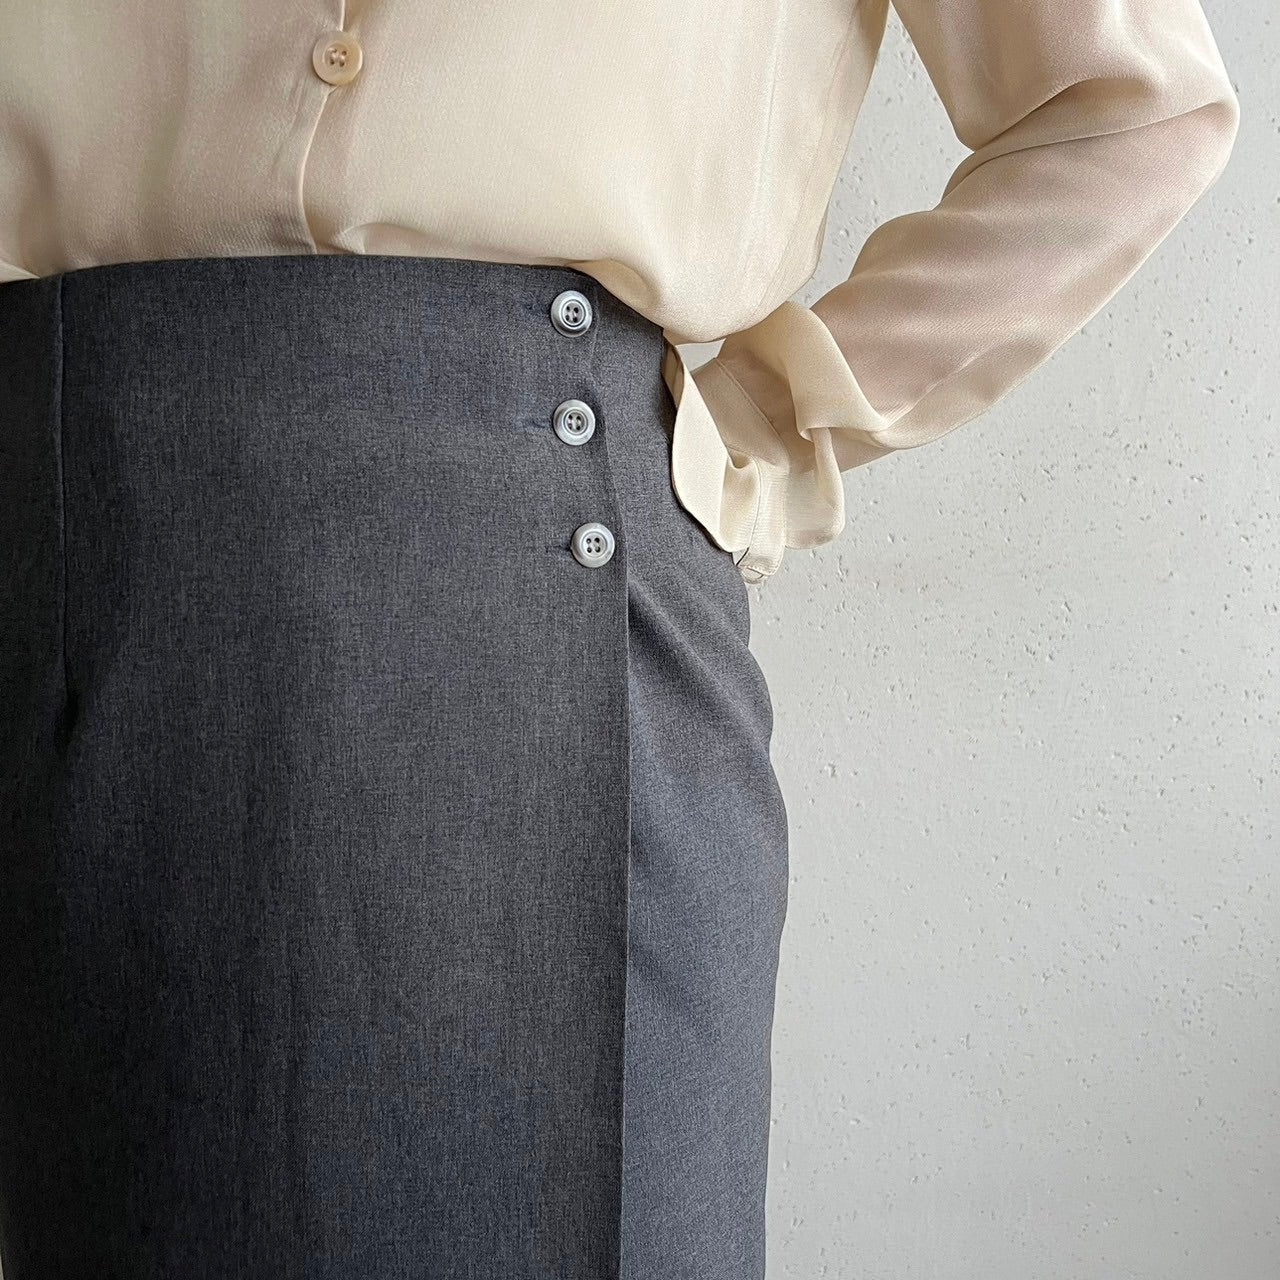 90s Wrap Skirt Made in Italy